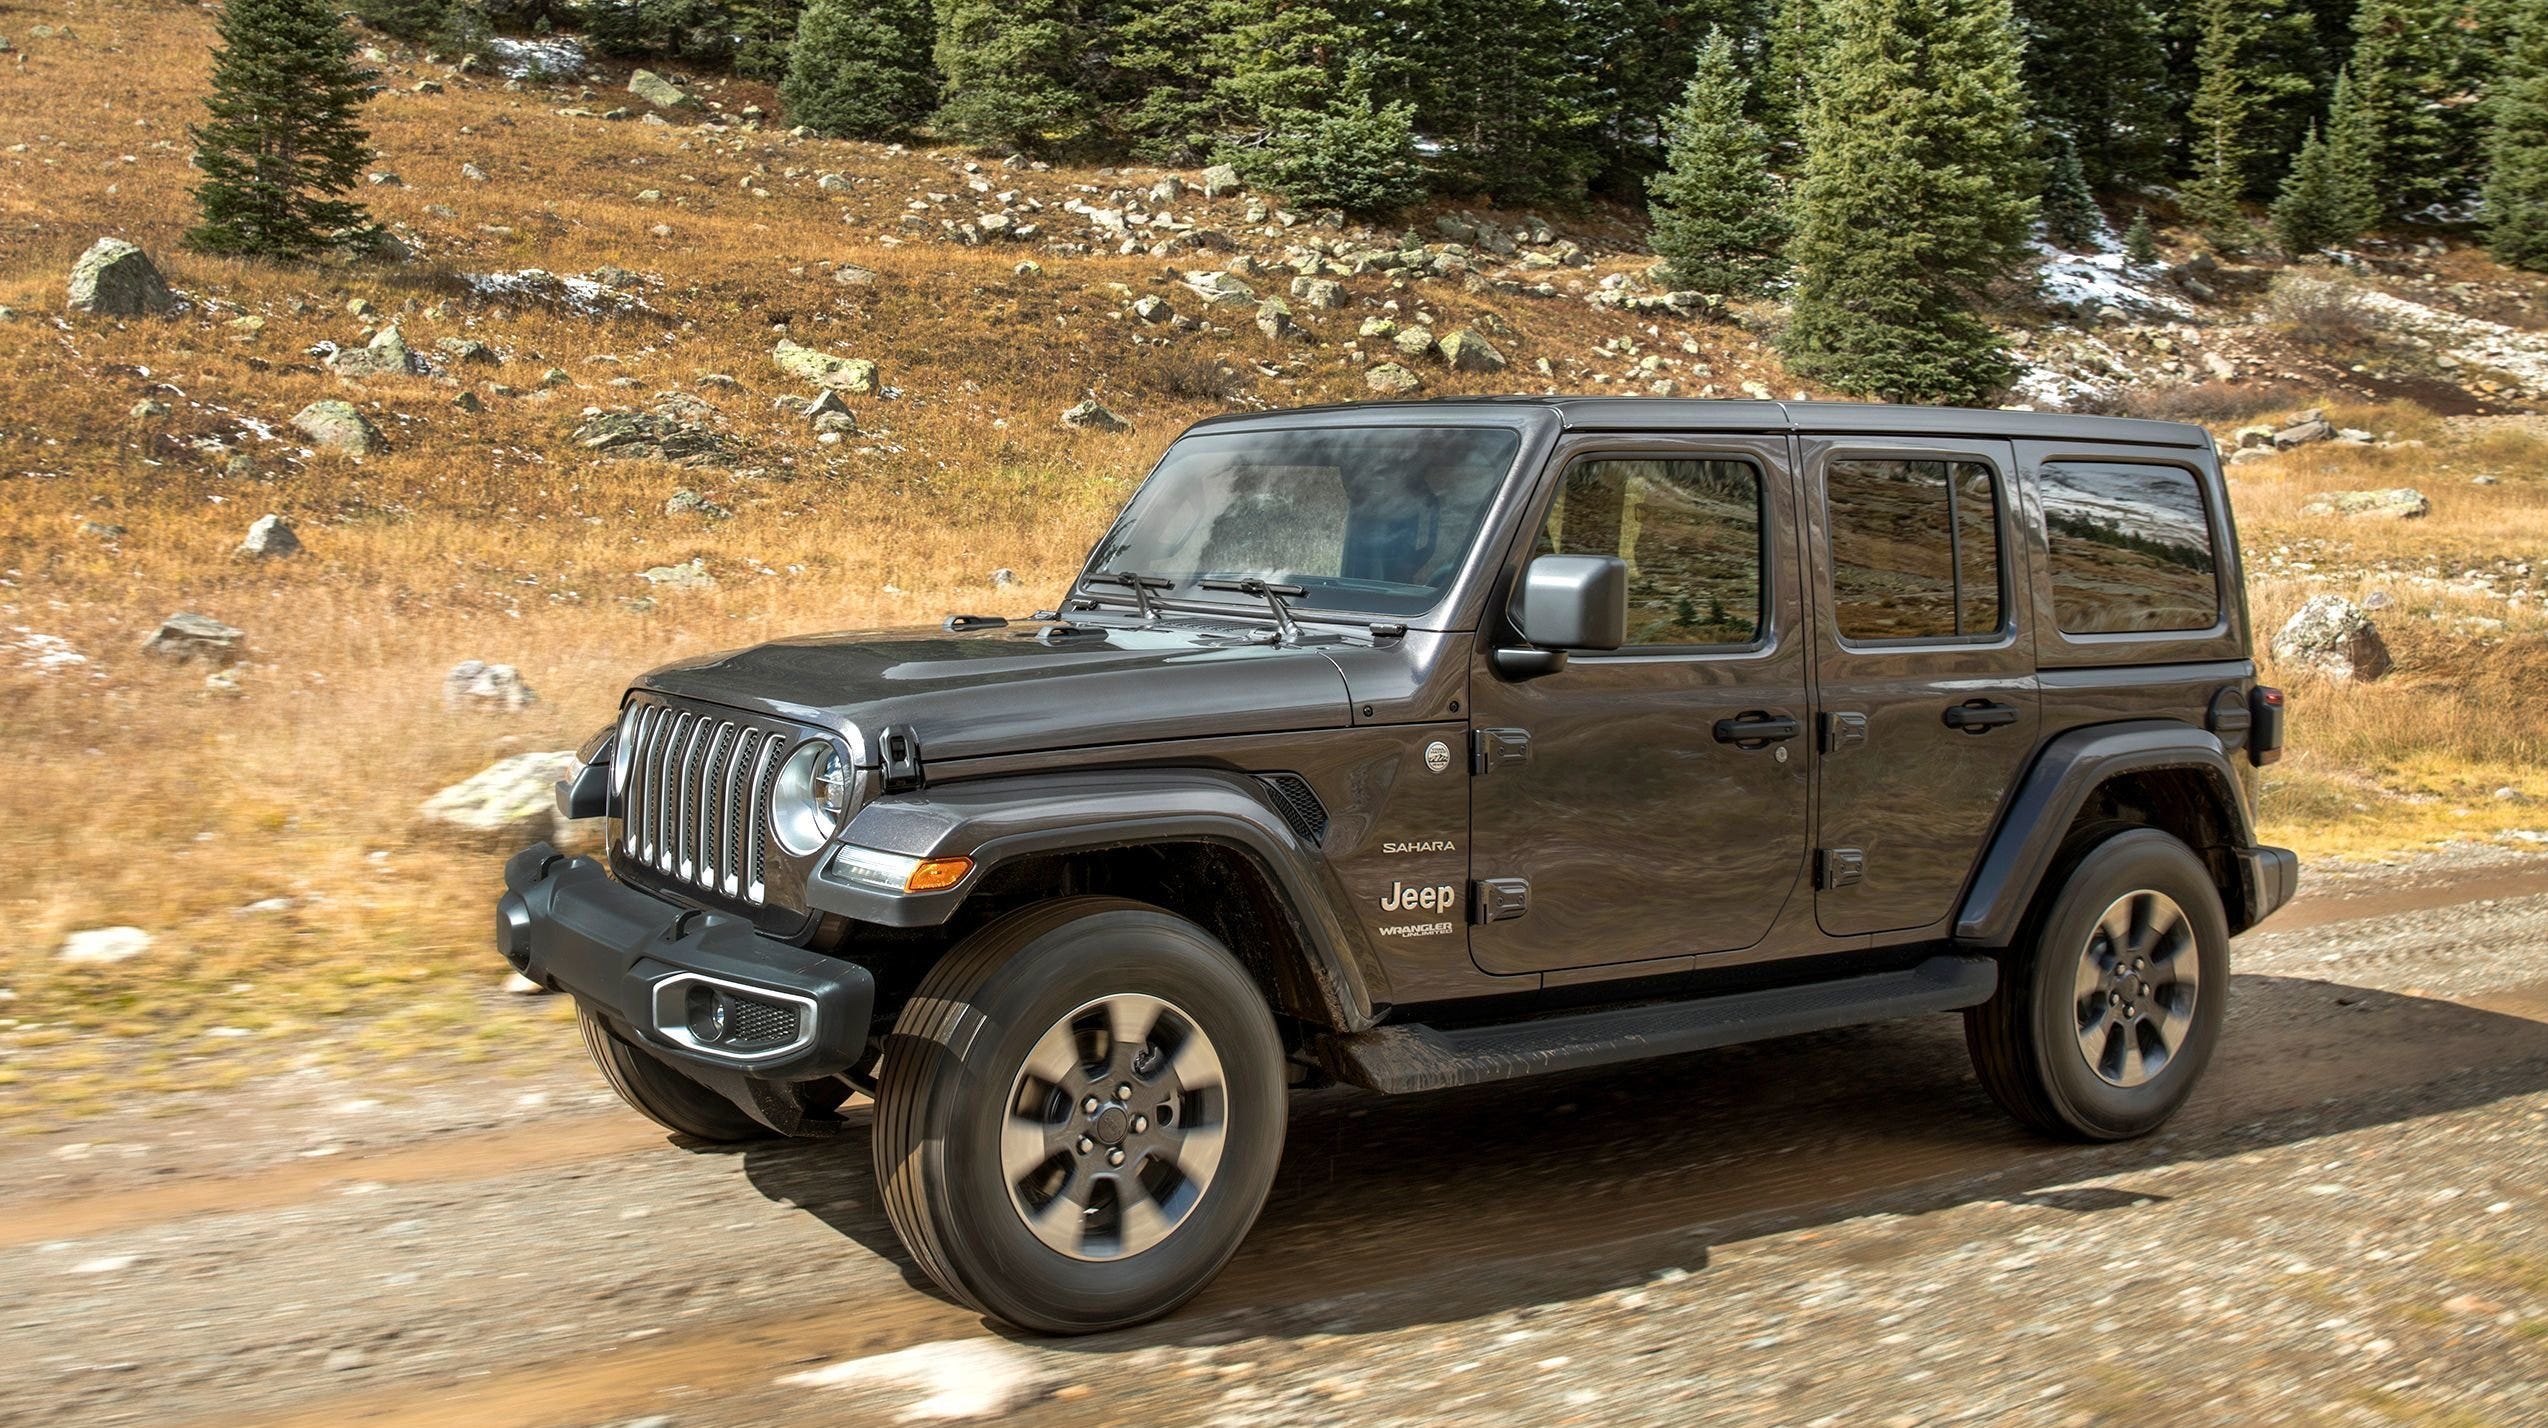 US investigating steering problems, welds in Jeep Wranglers